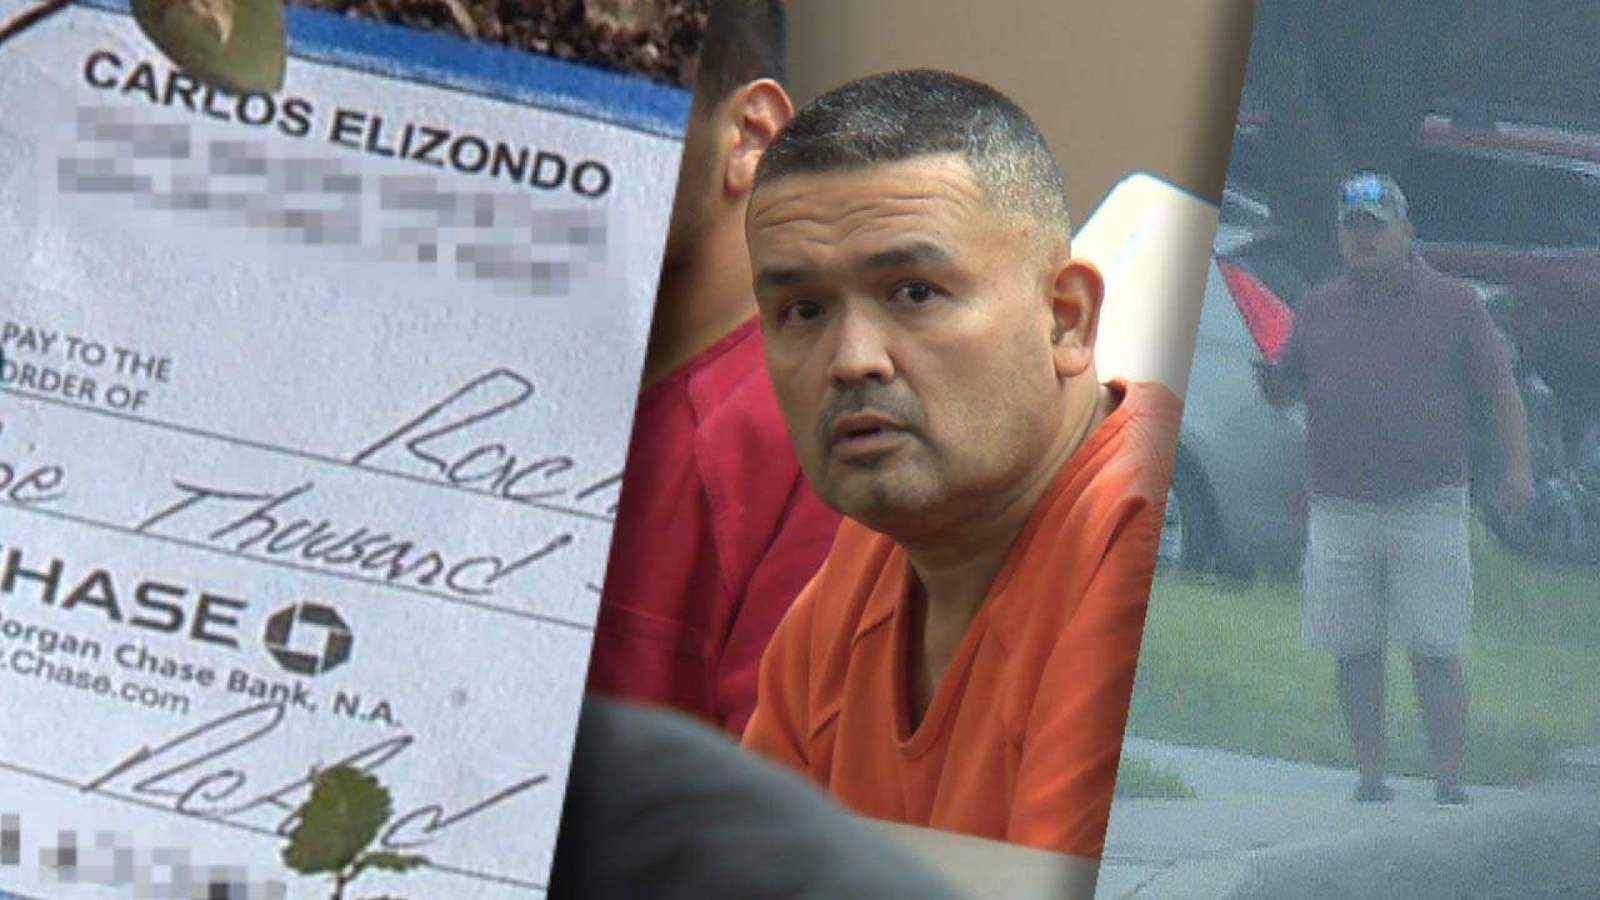 Convicted San Antonio contractor accused of writing bad checks to outraged customers